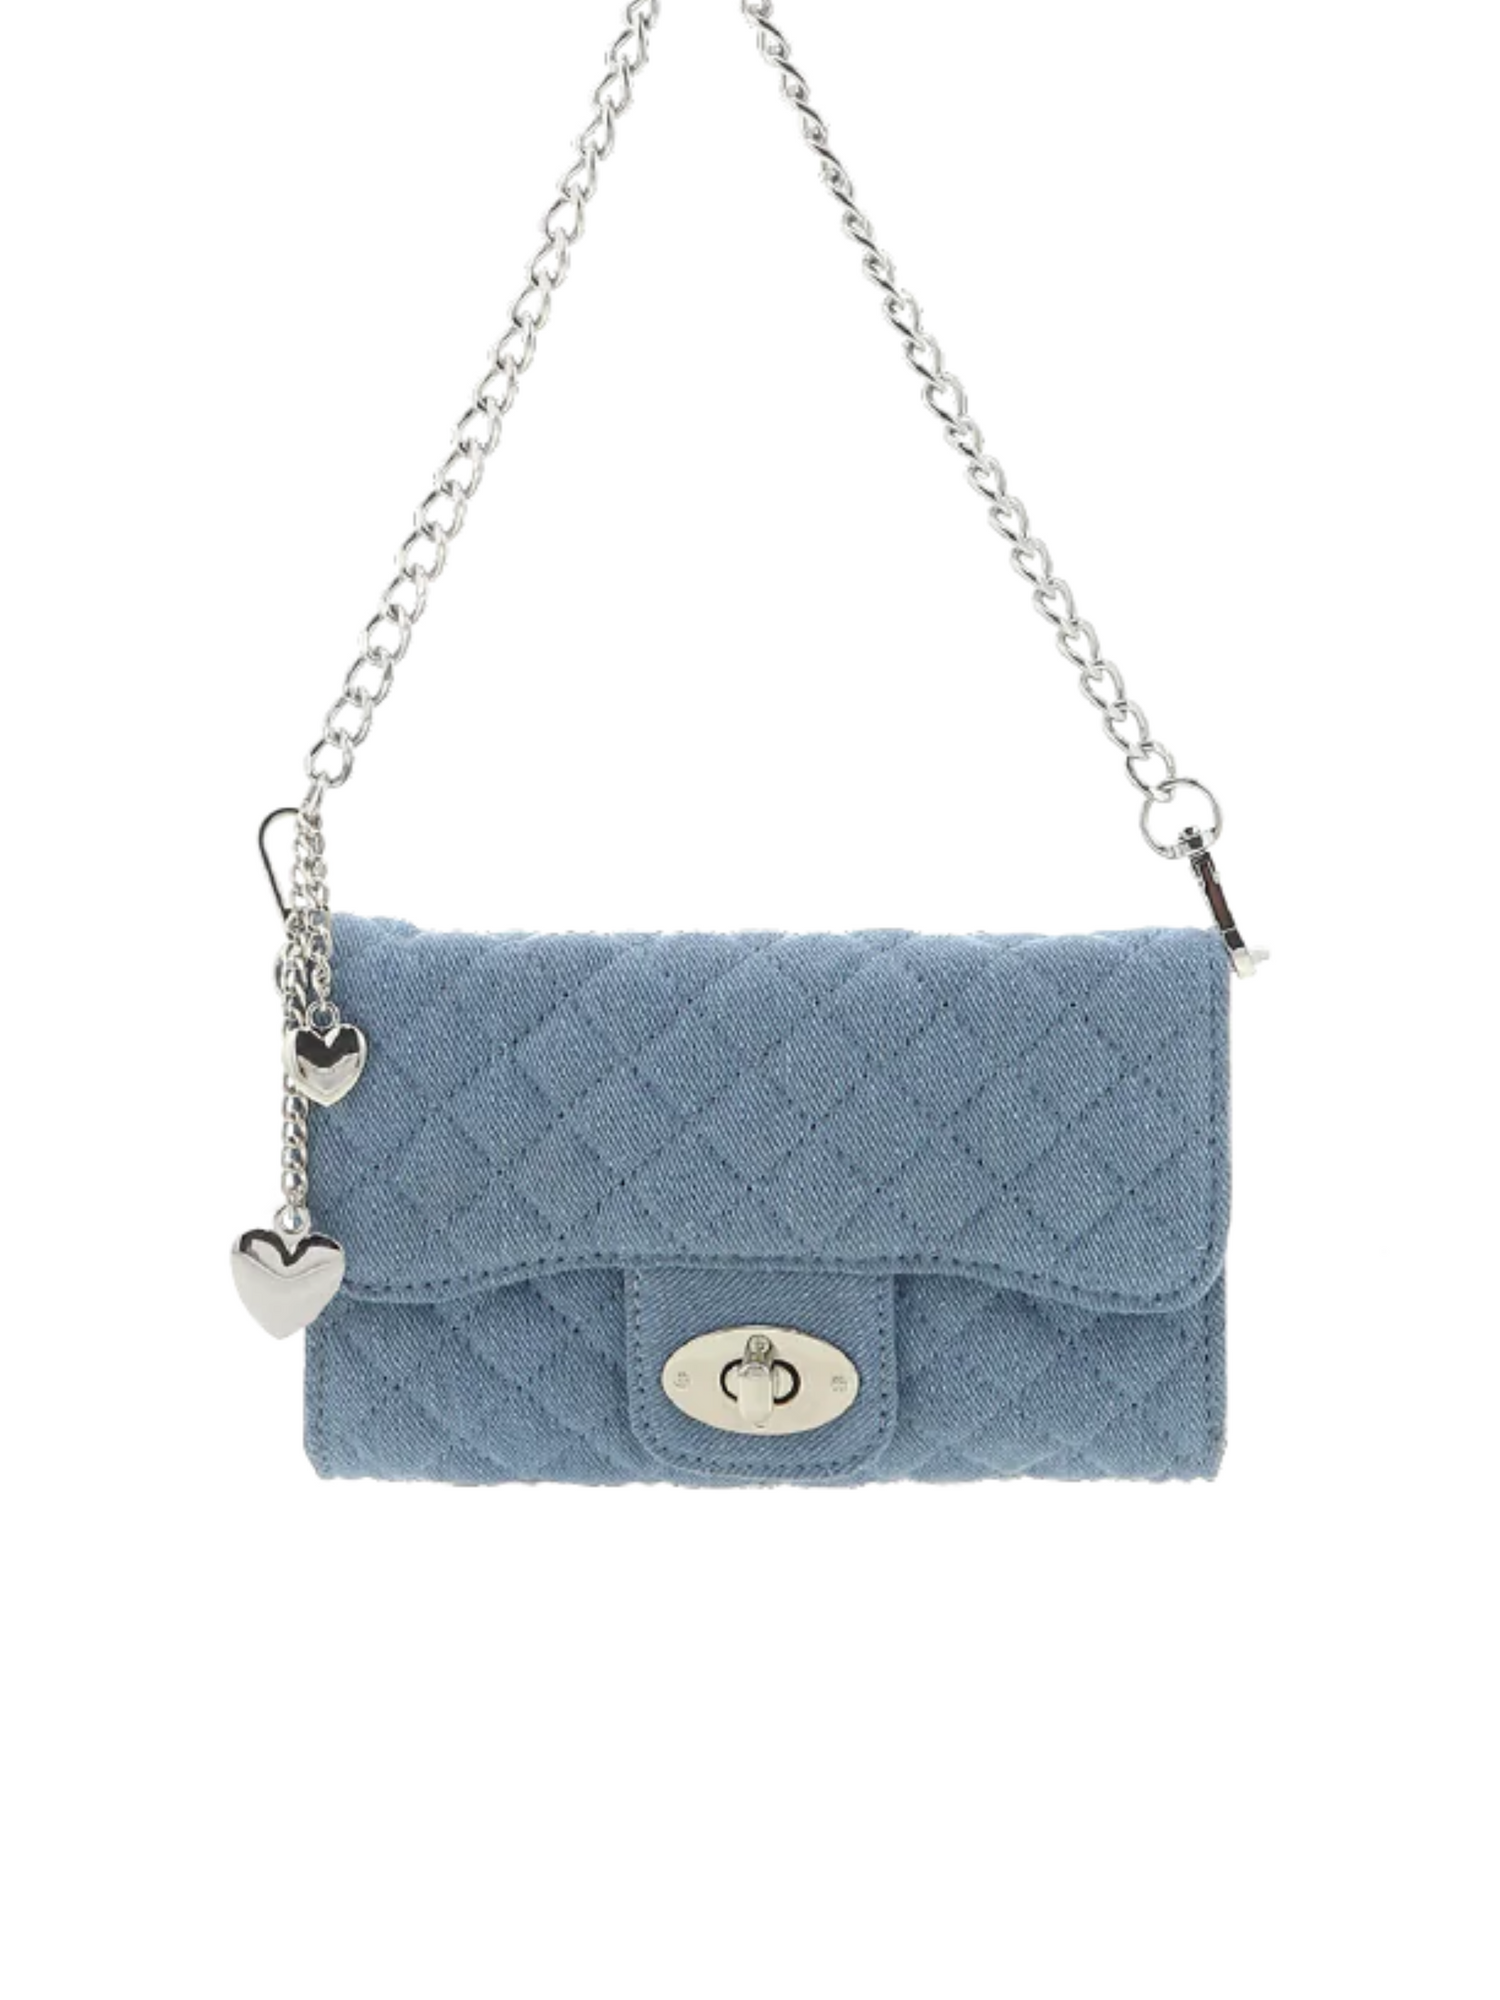 quilted denim crossbody purse with silver chain